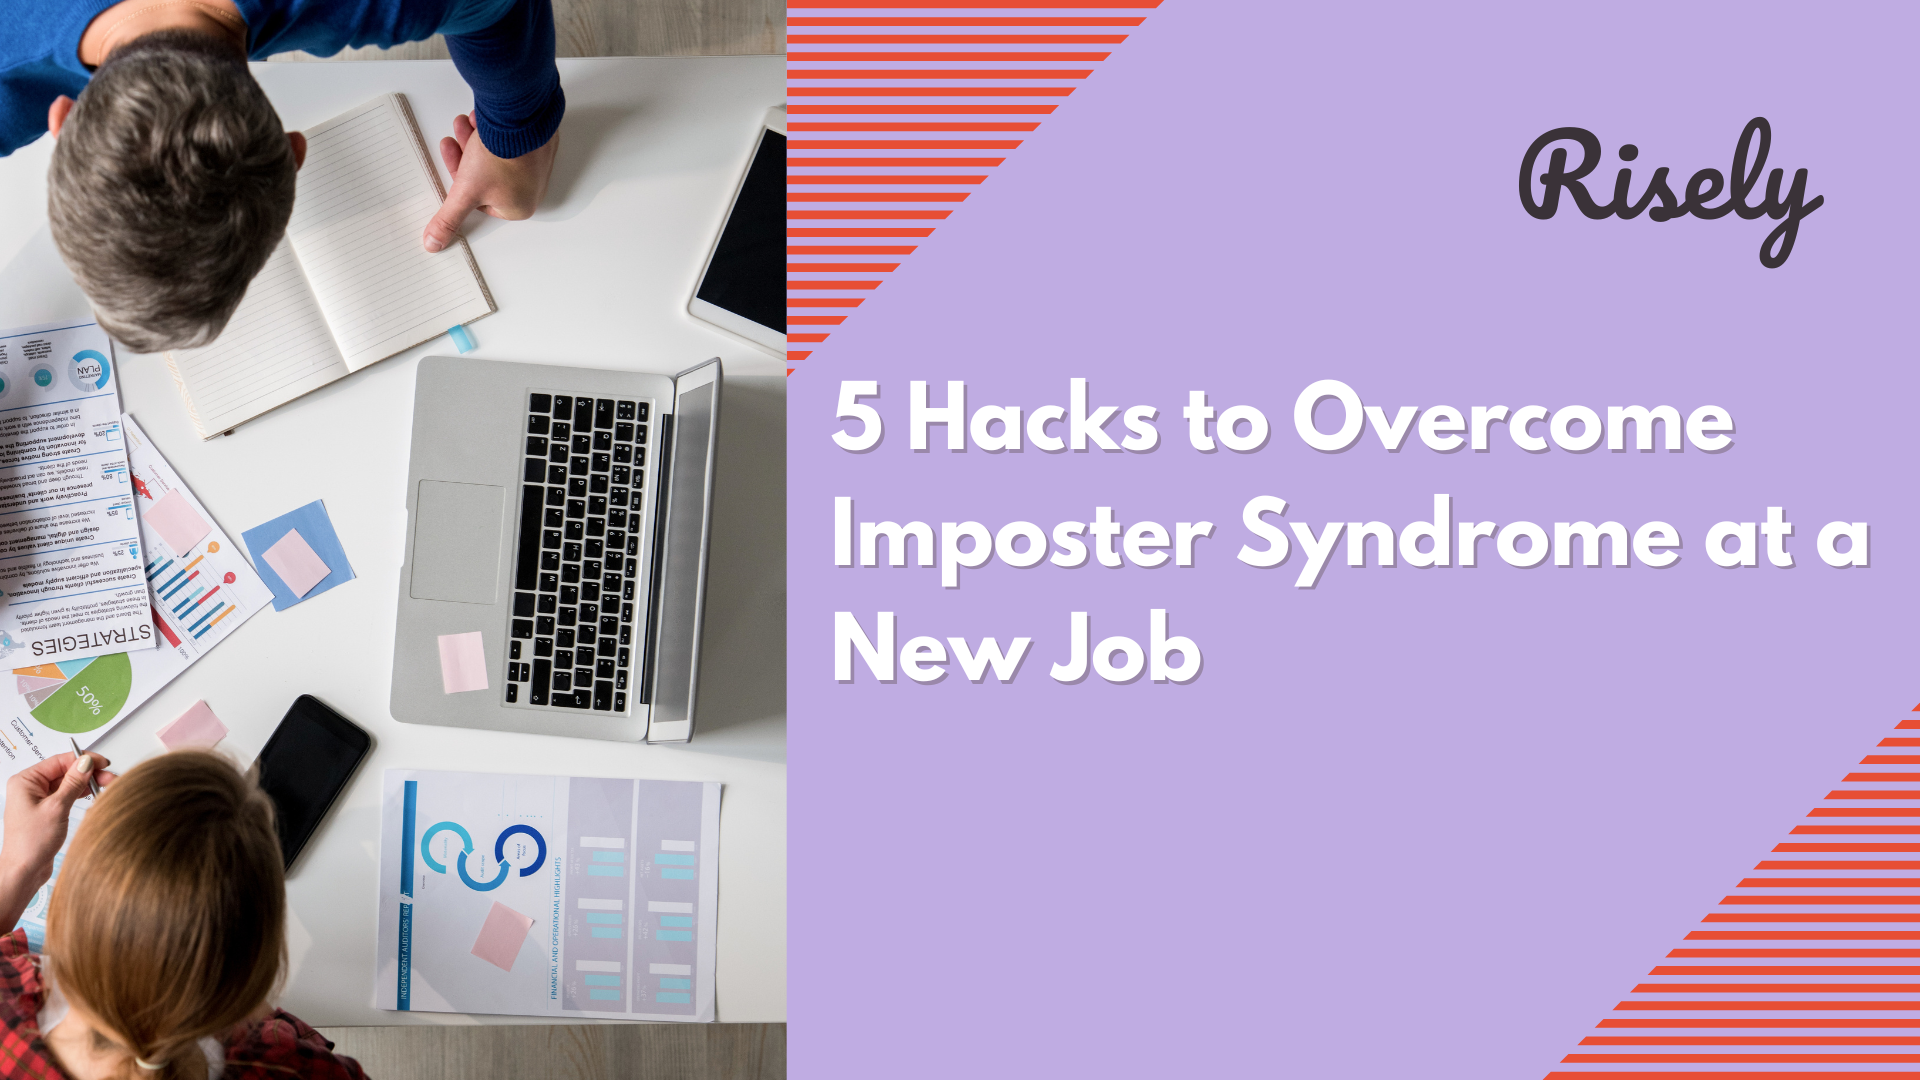 Imposter Syndrome at a New Job